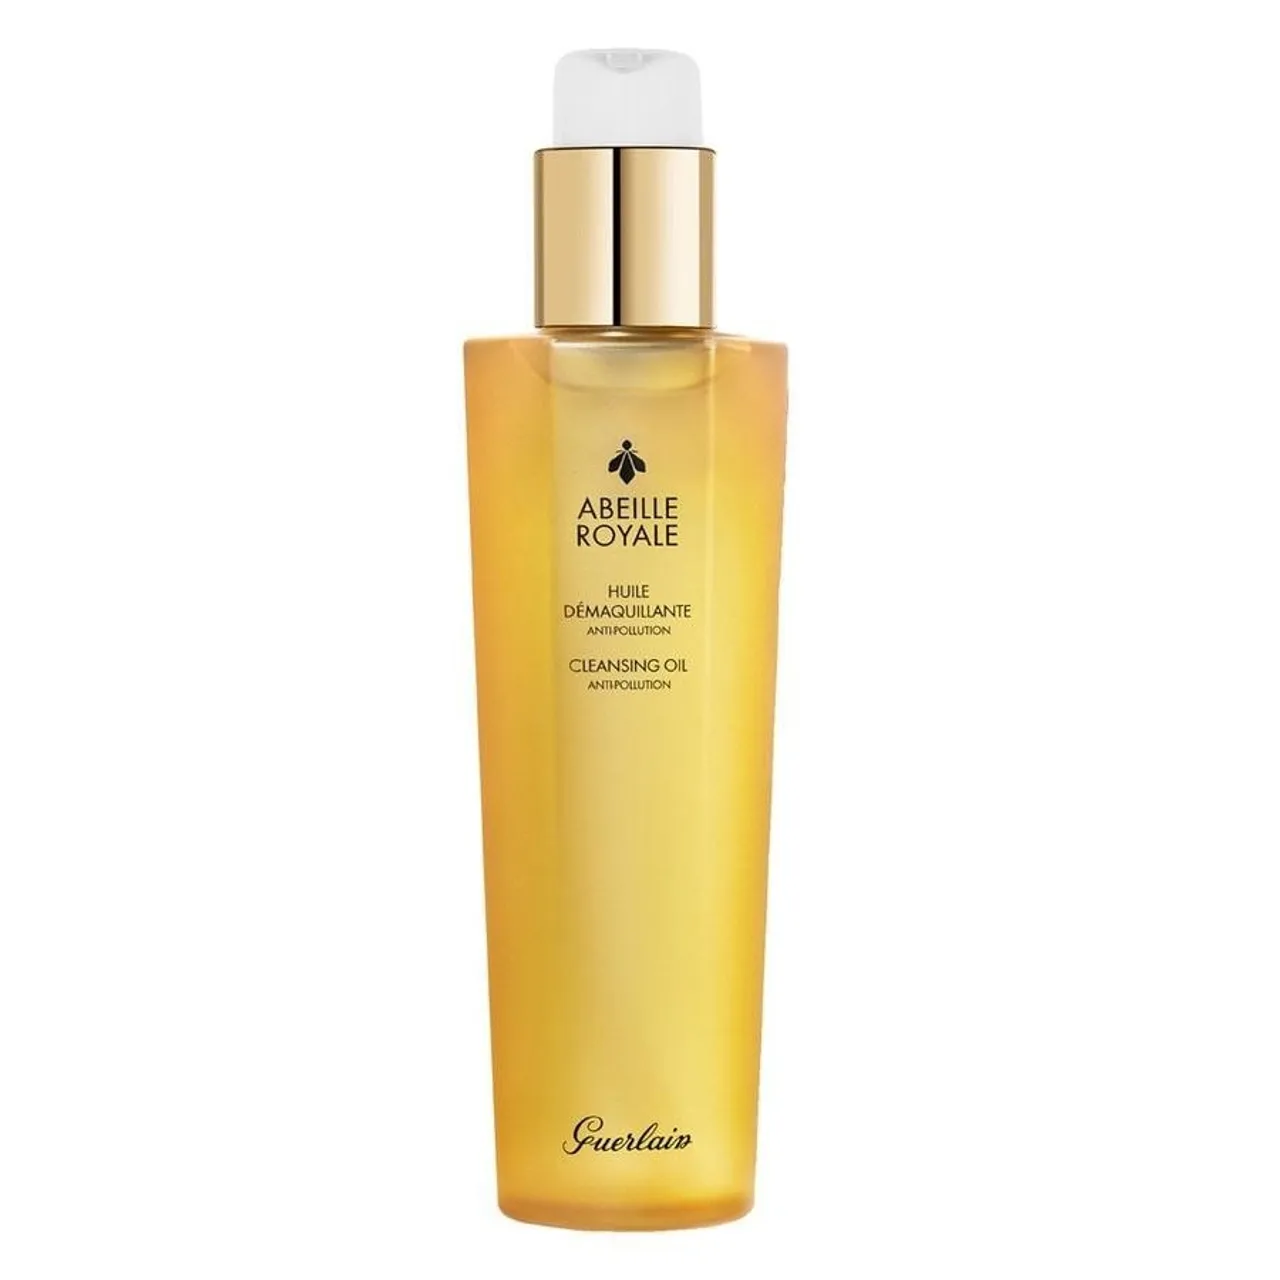 Guerlain - Abeille Royale Cleansing Oil Tagescreme 150 ml